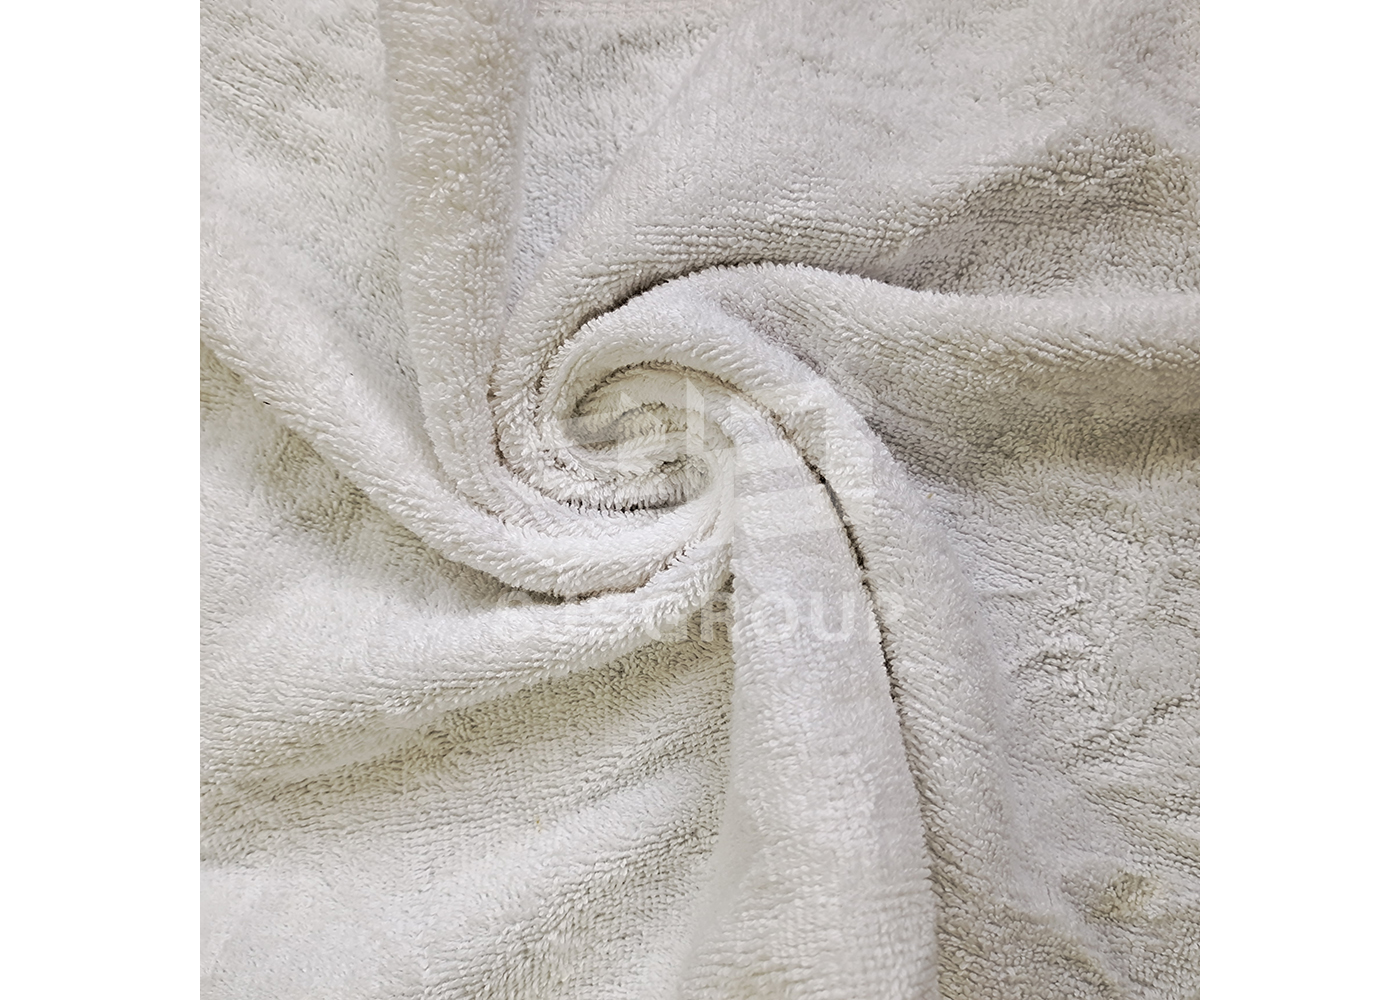 White Towel Rags-White Mixed Towel Cotton Rags Grade A